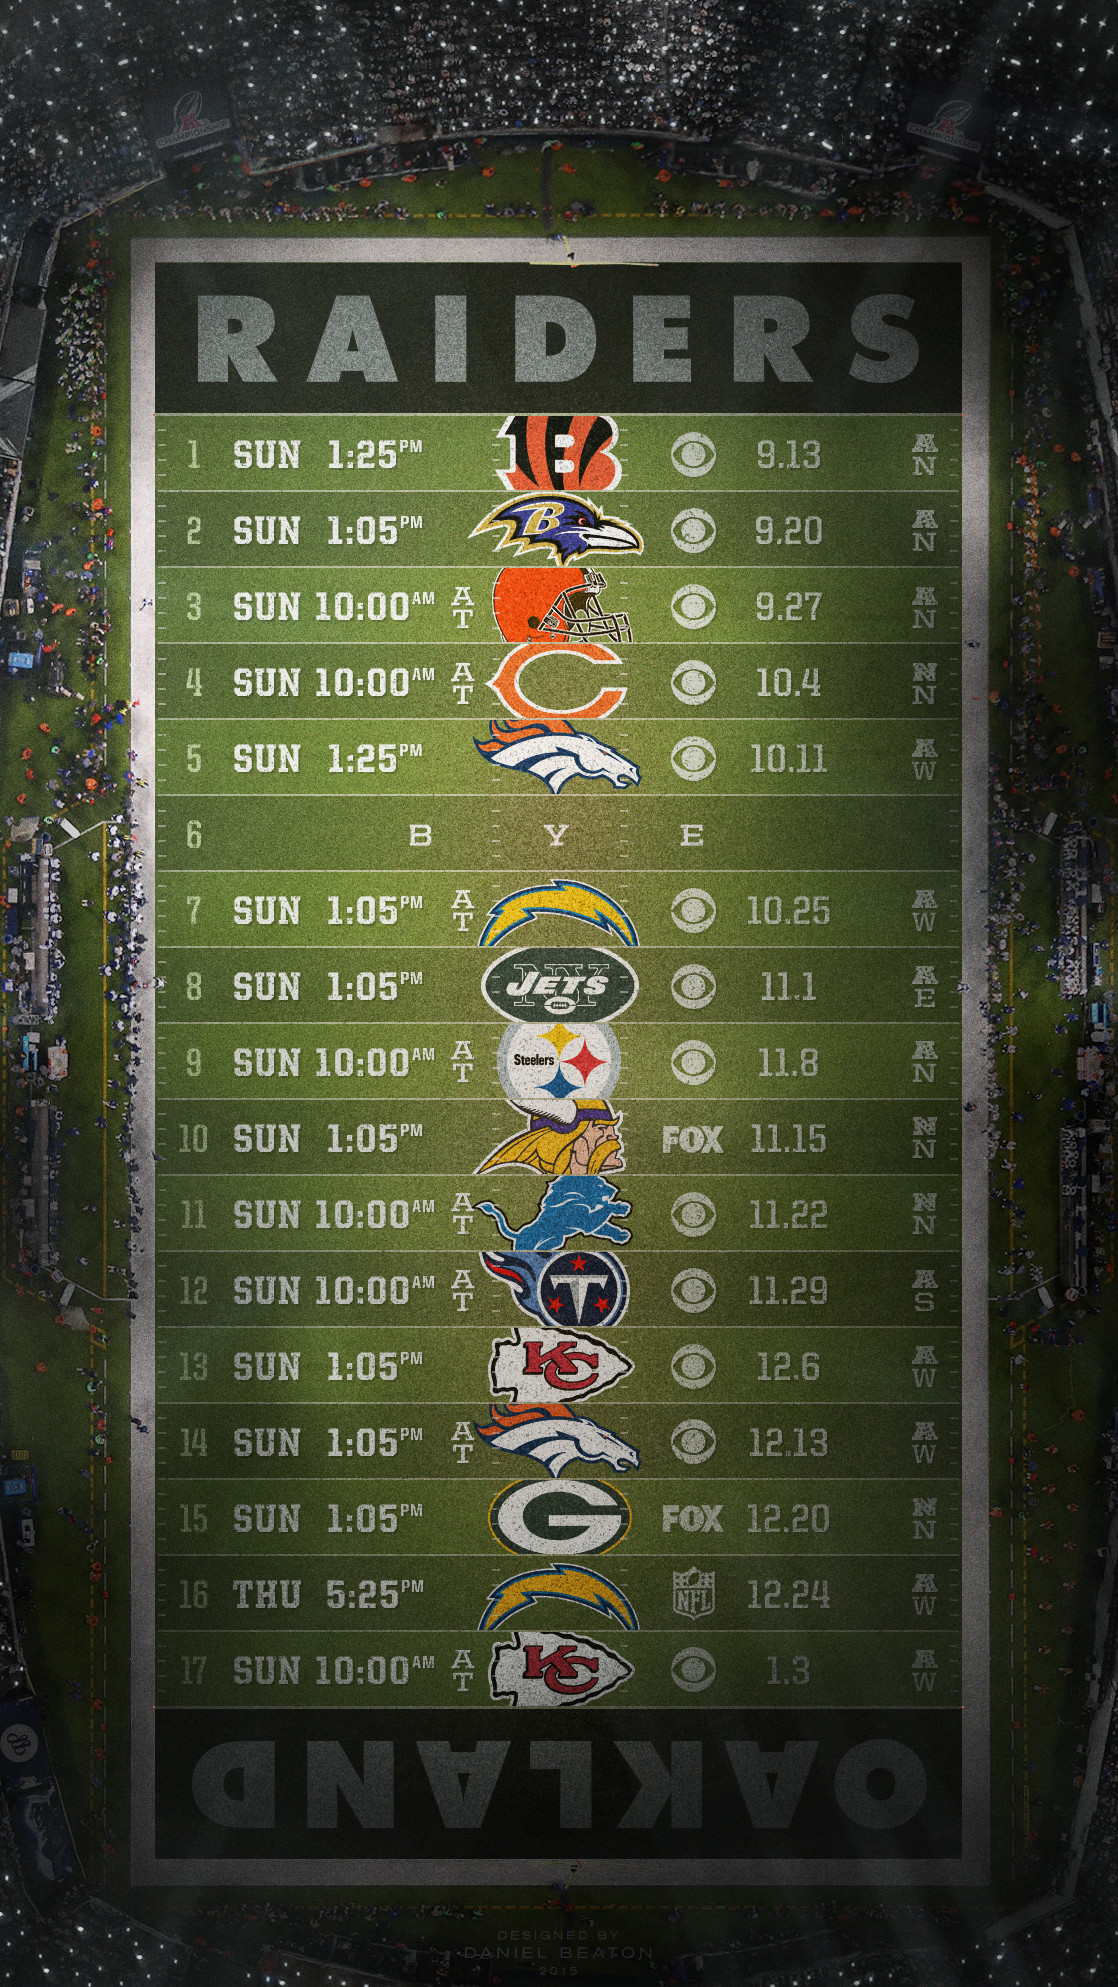 1118x1987 Raiders schedule wallpaper for Android, iOS and Desktop : oaklandraiders